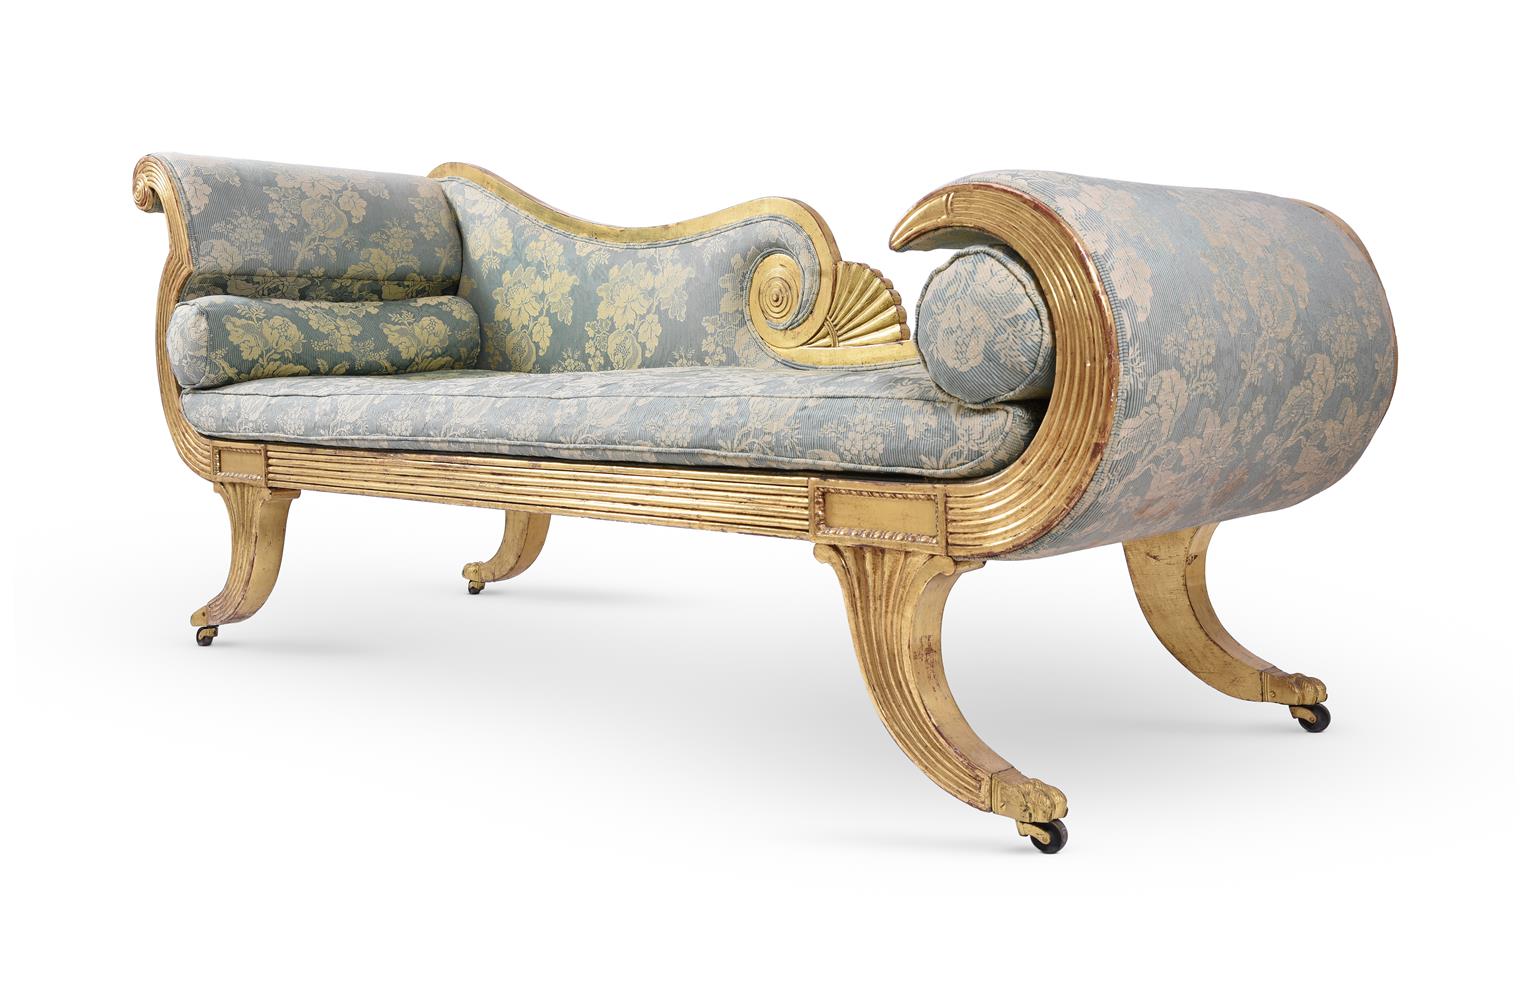 A REGENCY GILTWOOD AND UPHOLSTERED CHAISE LONGUE, IN THE MANNER OF GILLOWS - Image 2 of 8